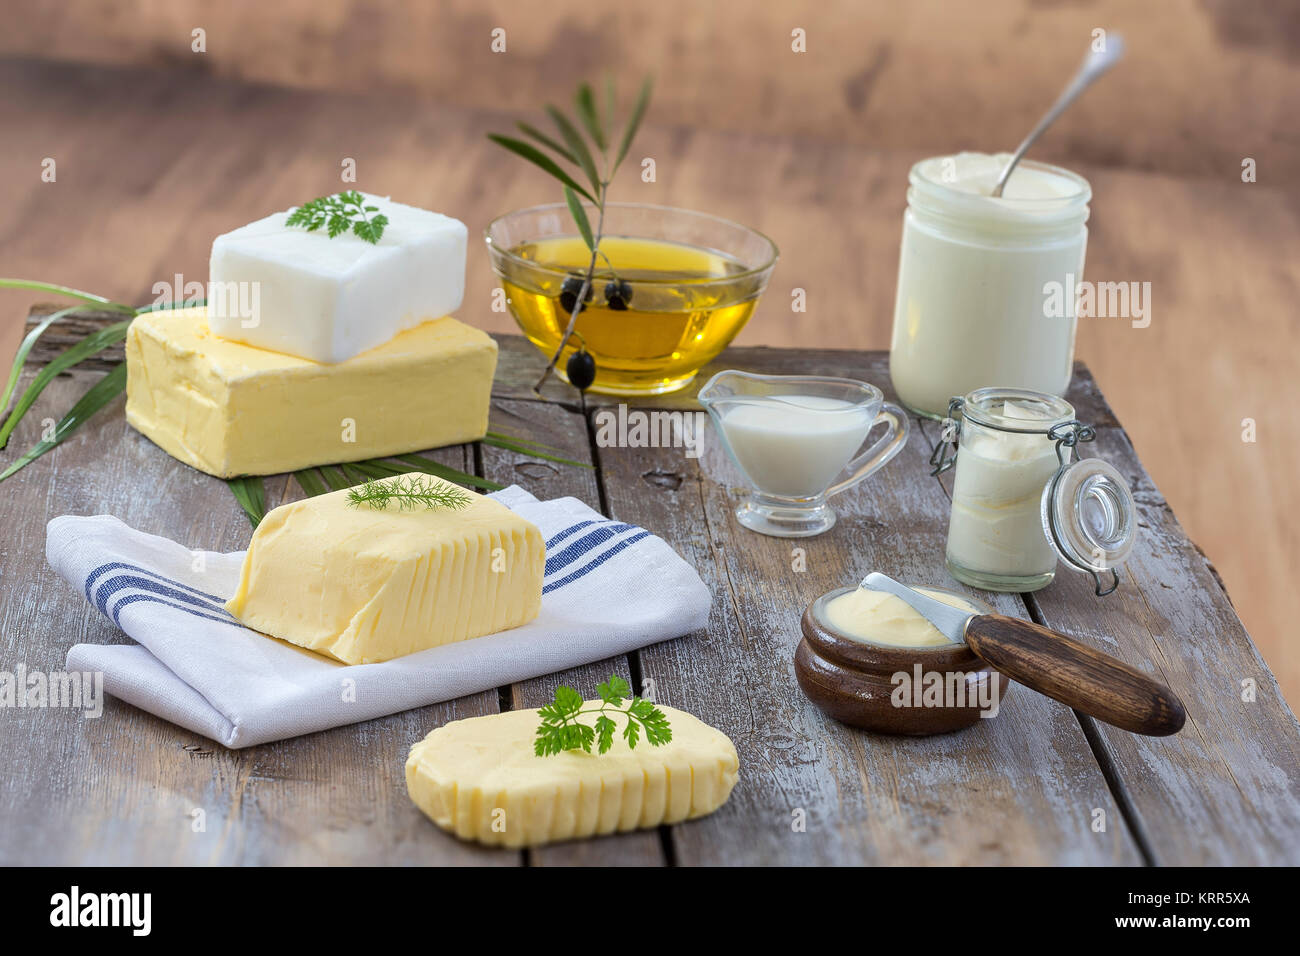 food Fats and oil : set of dairy product and oil and animal fats on a wooden background Stock Photo